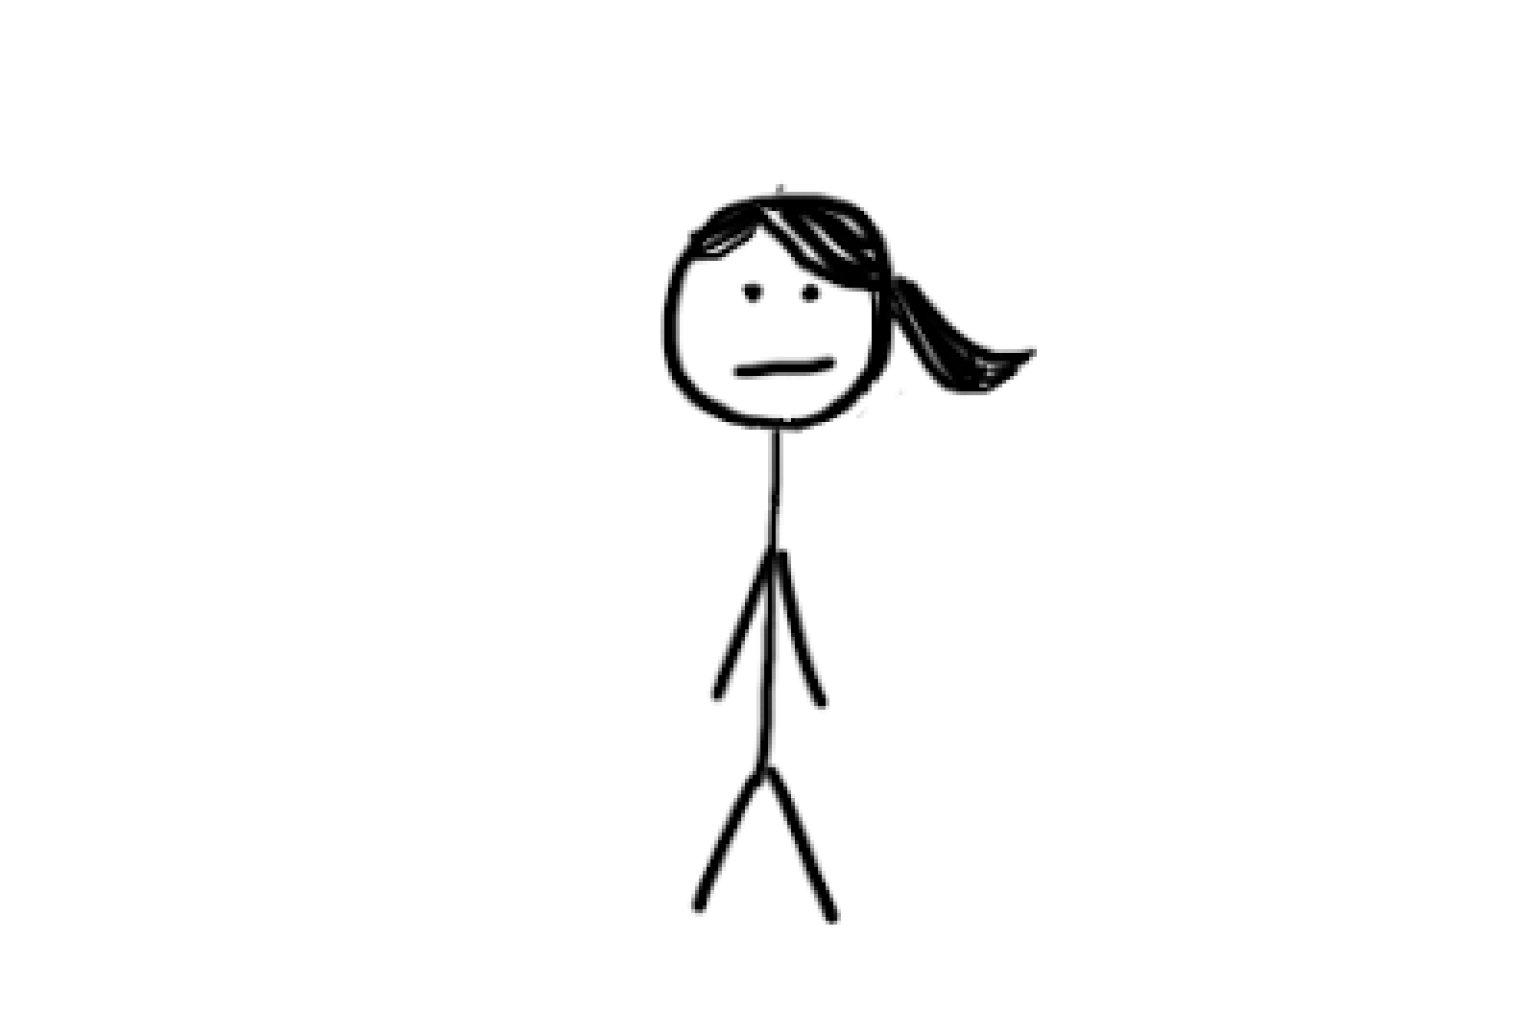 Crying Stick Figure Clipart